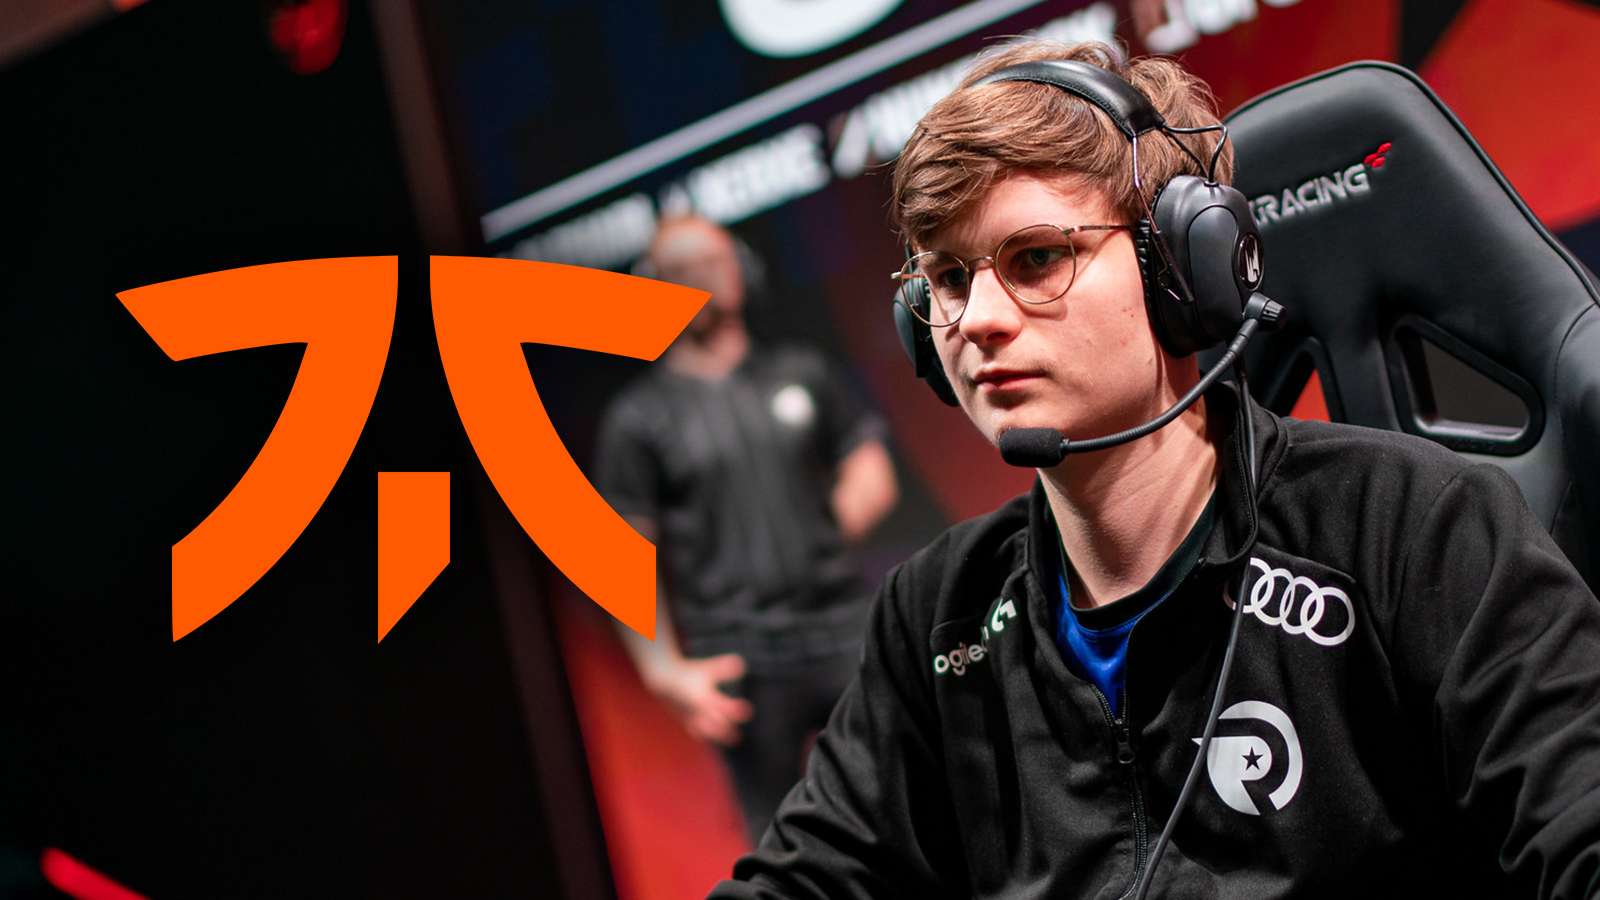 Upset moving to Fnatic for LEC 2021